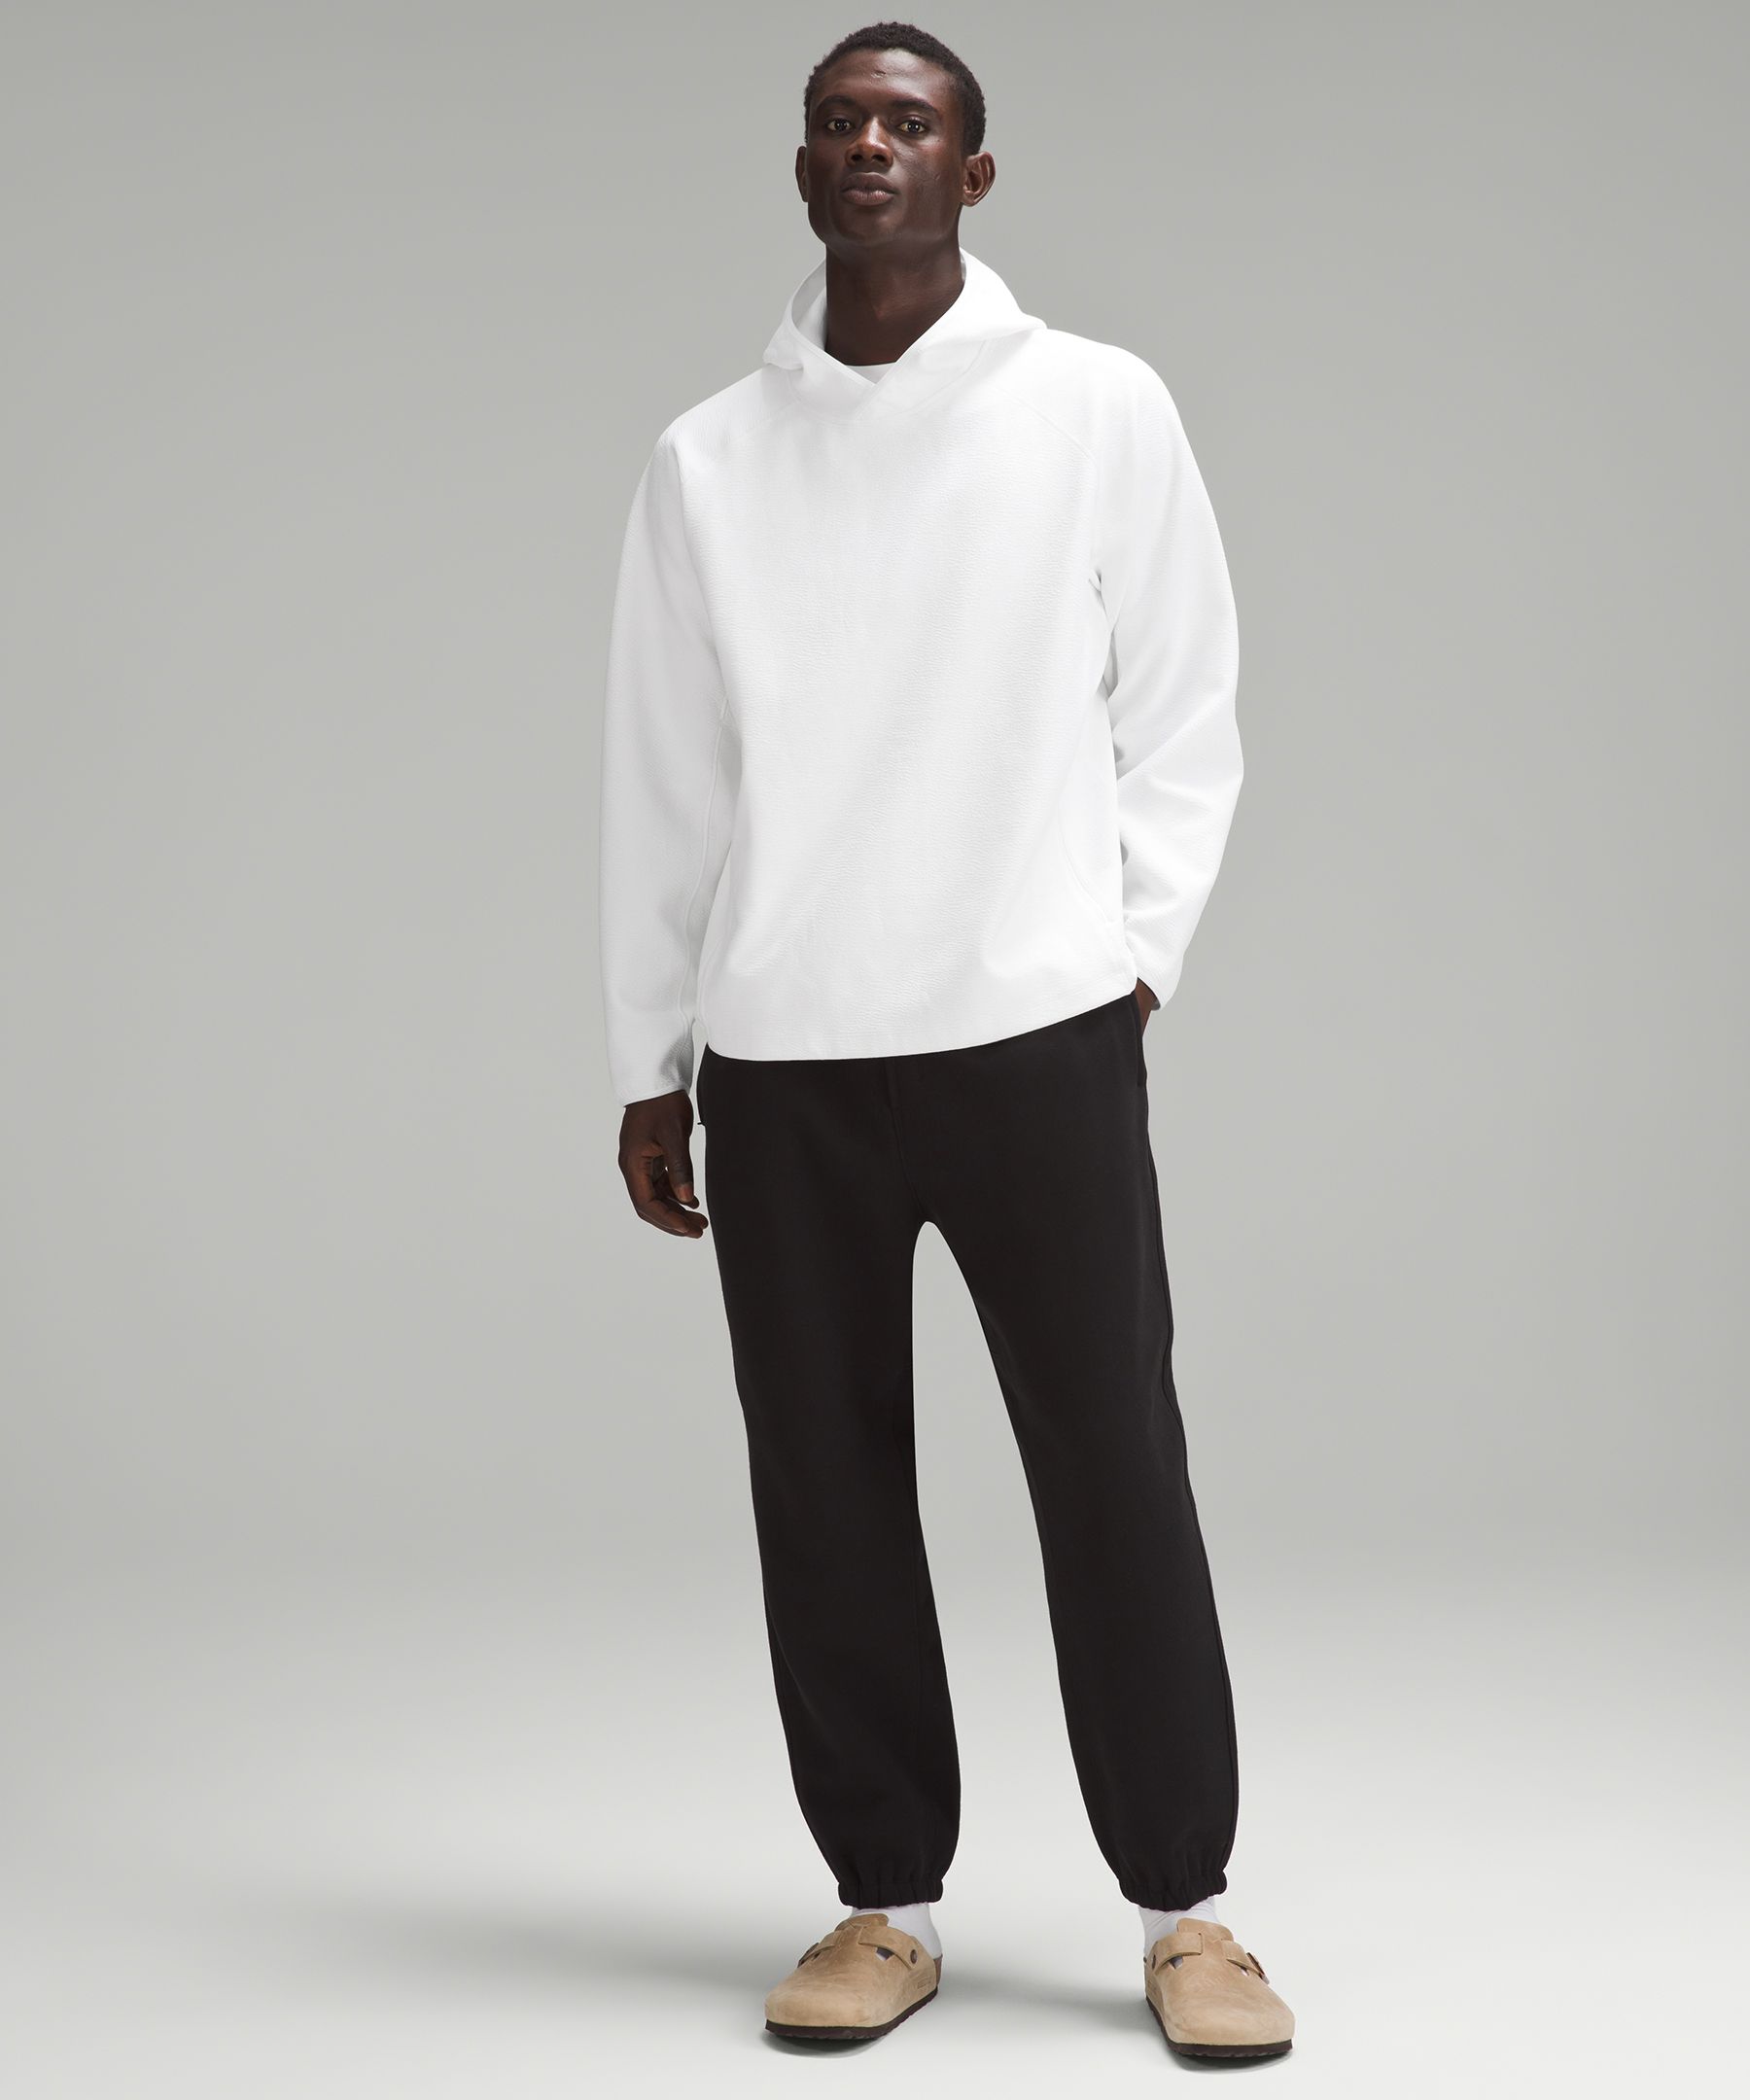 Zara joins the gender fluid movement with new unisex clothing line, The  Independent